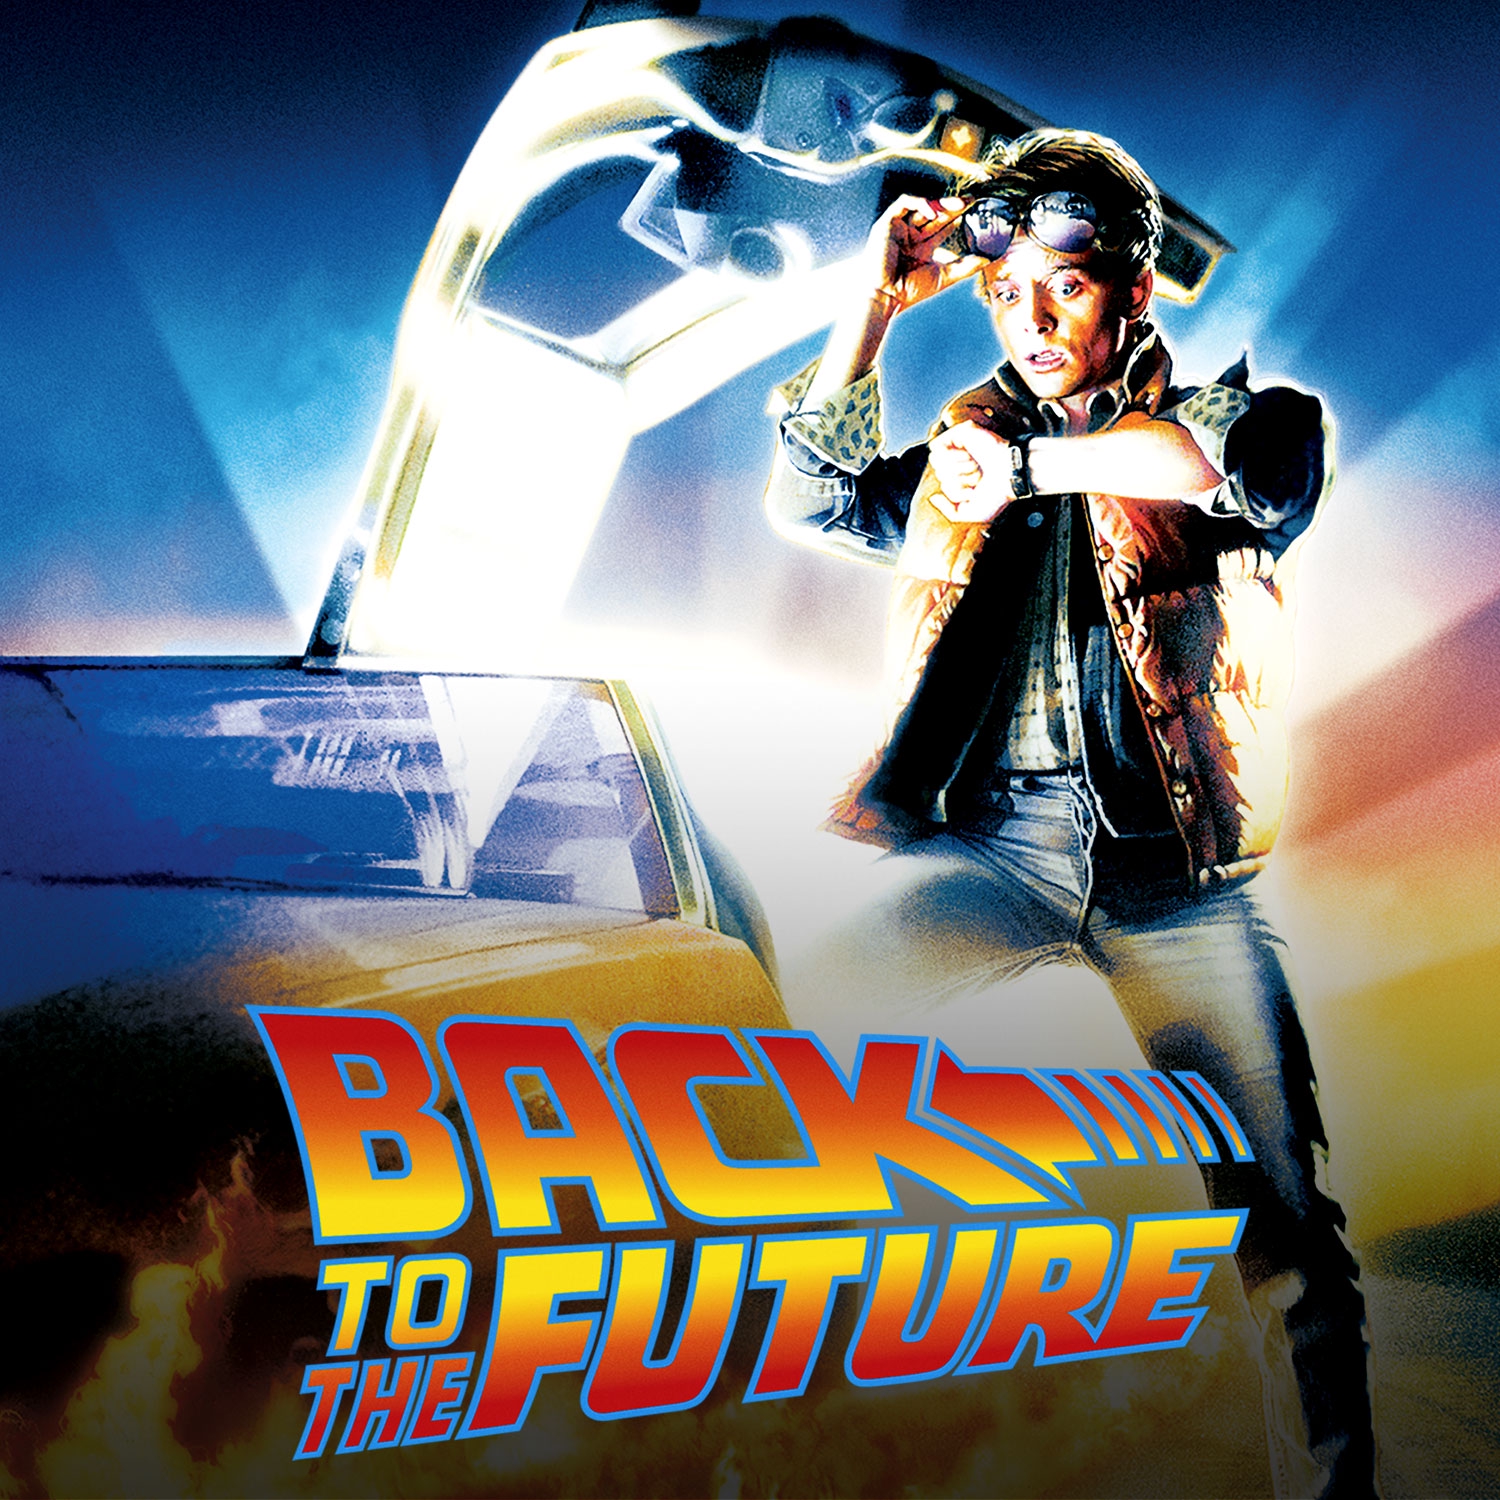 Back to the future online